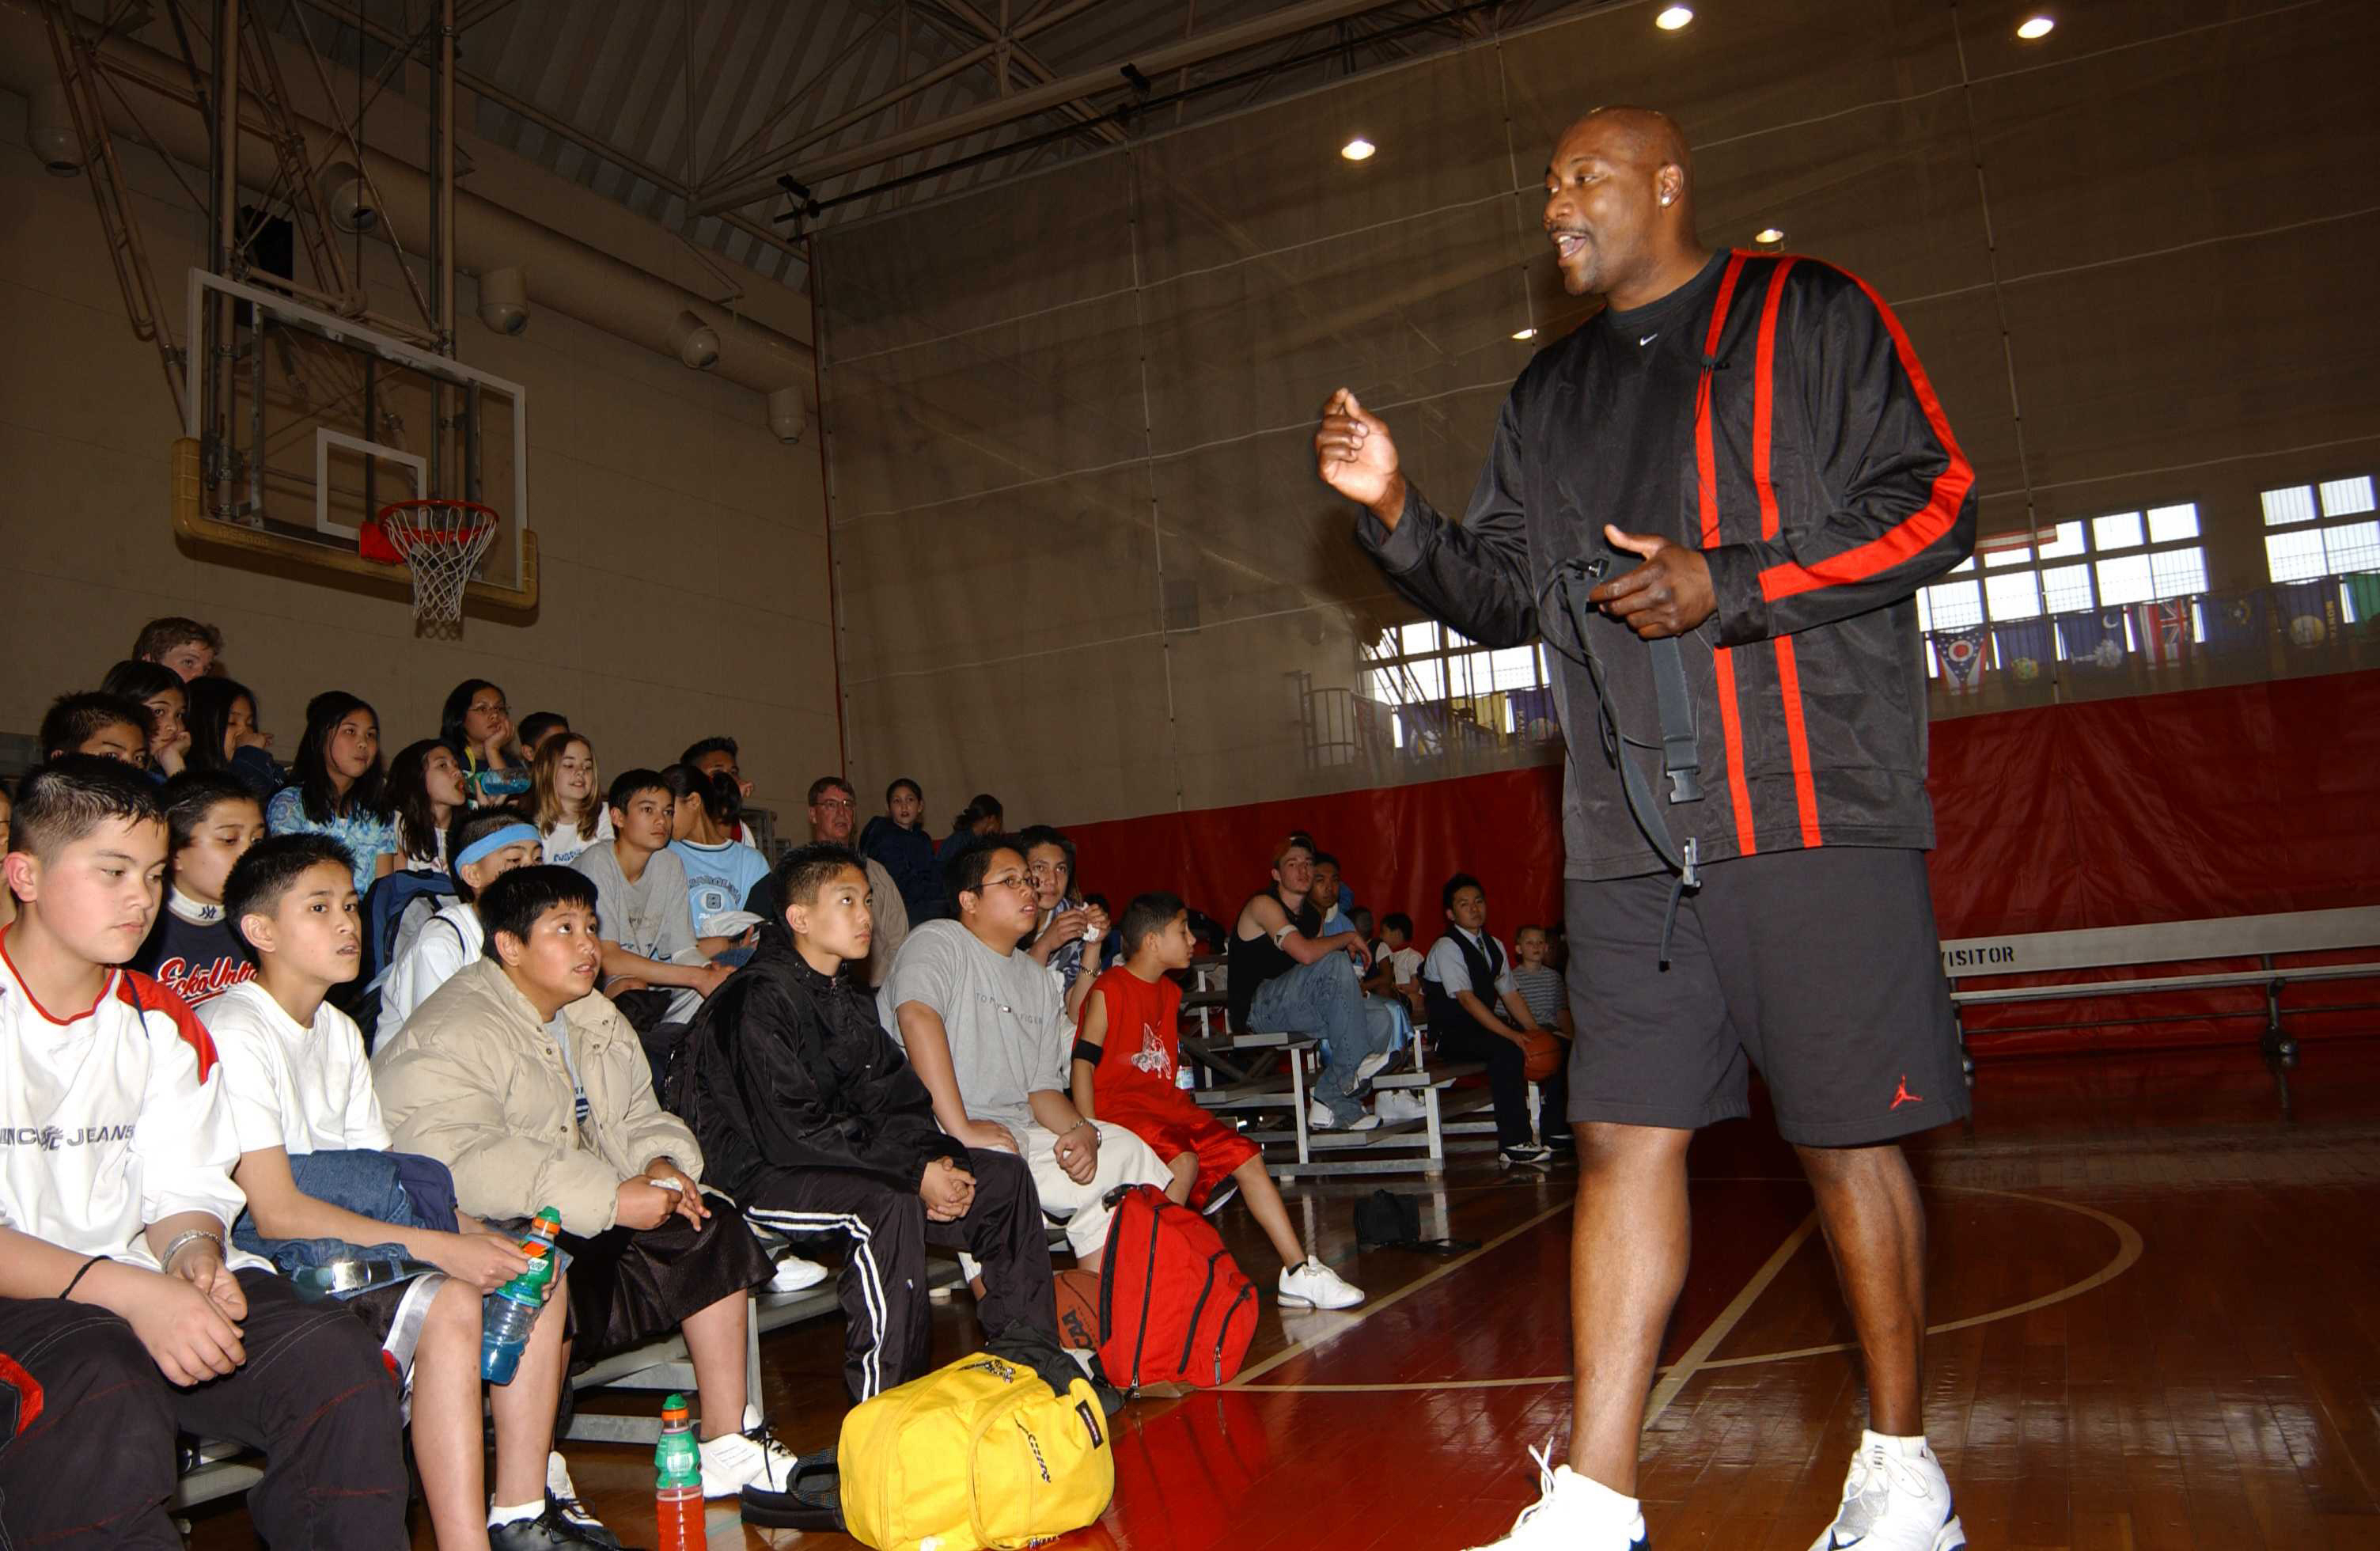 Former NBA player Jerome Kersey addresses a group of kids on the basketball court in the Naval Air Facility, Ranger Gym